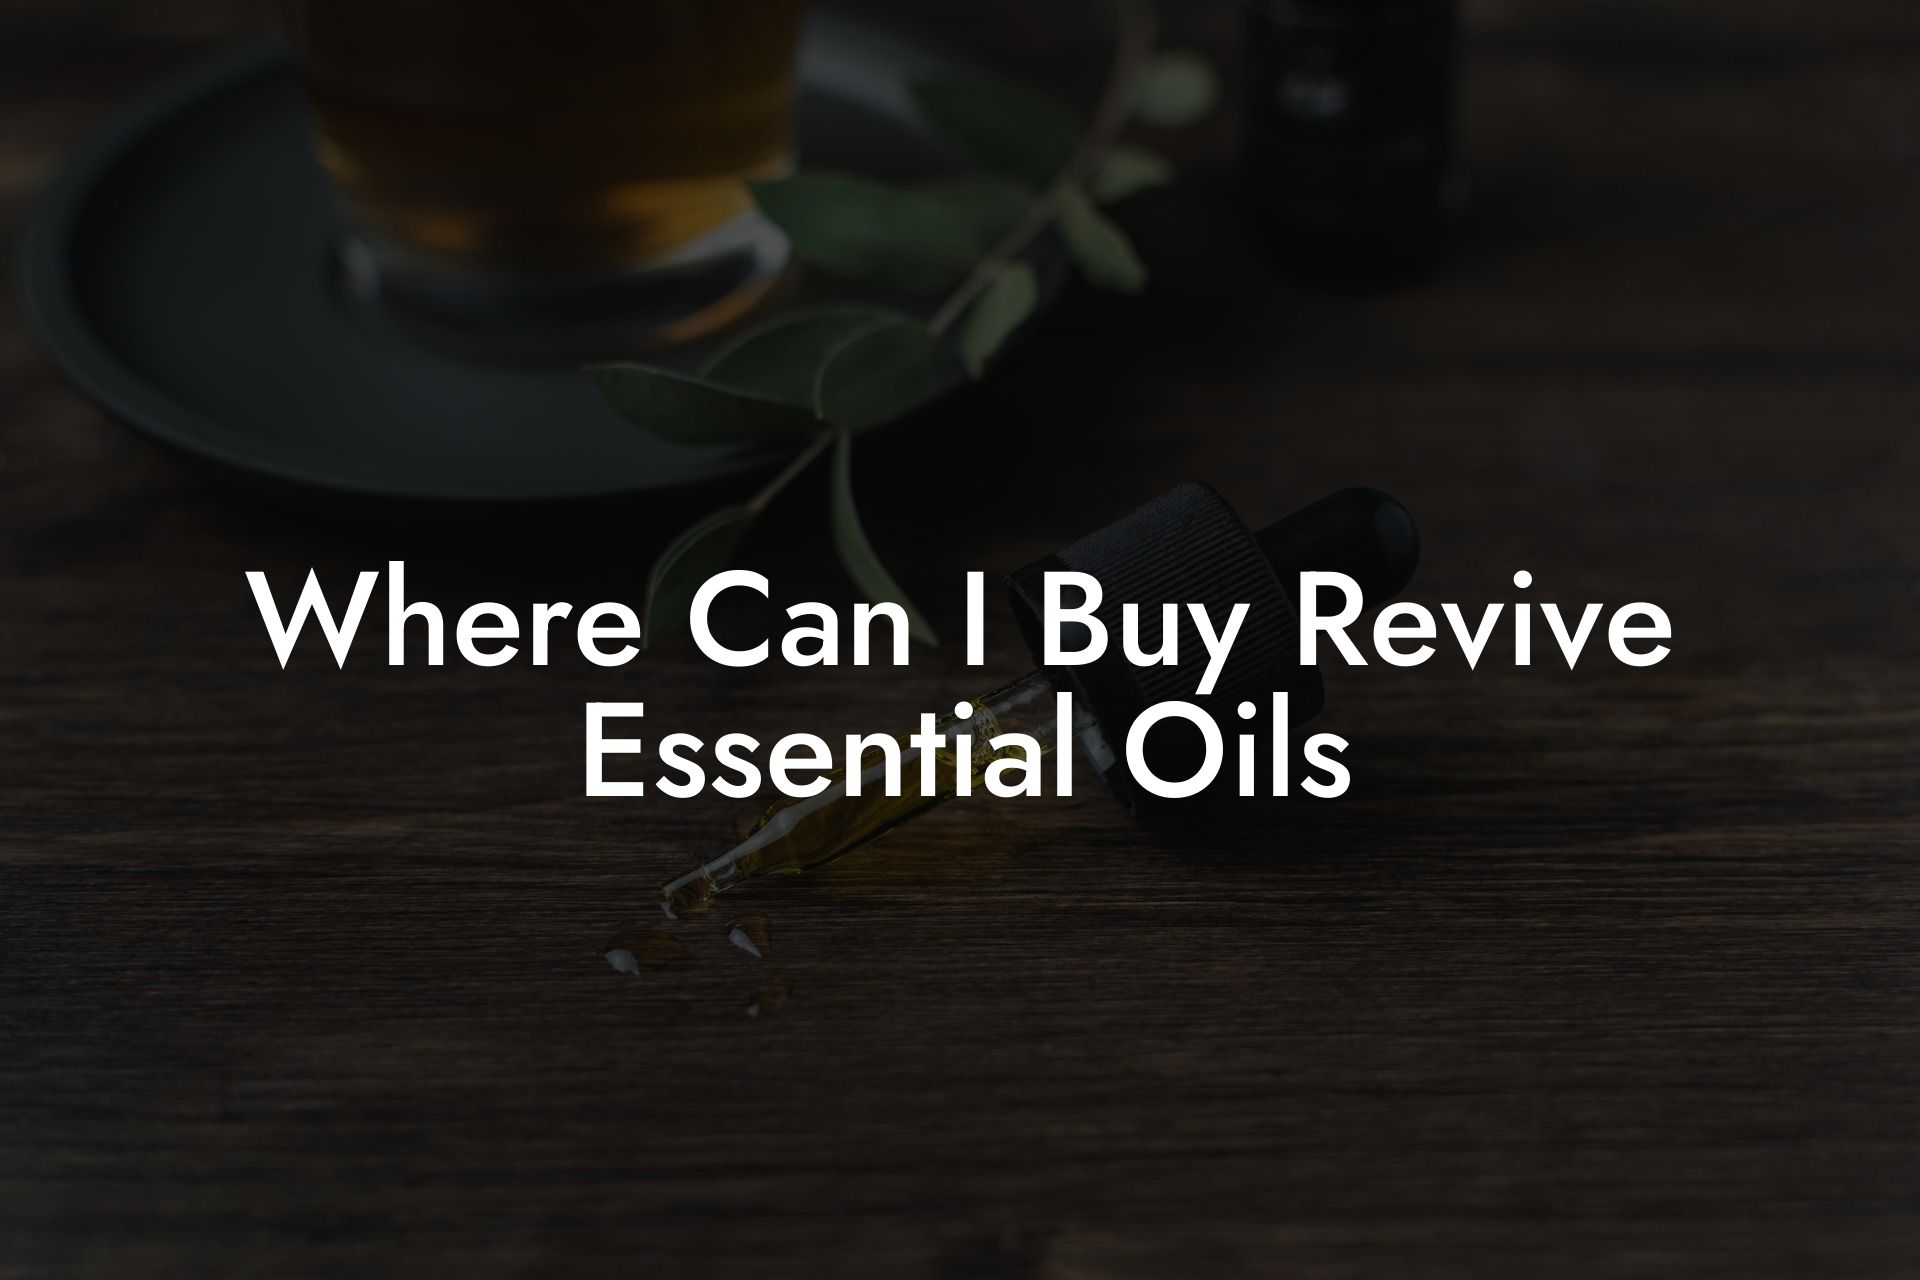 Where Can I Buy Revive Essential Oils